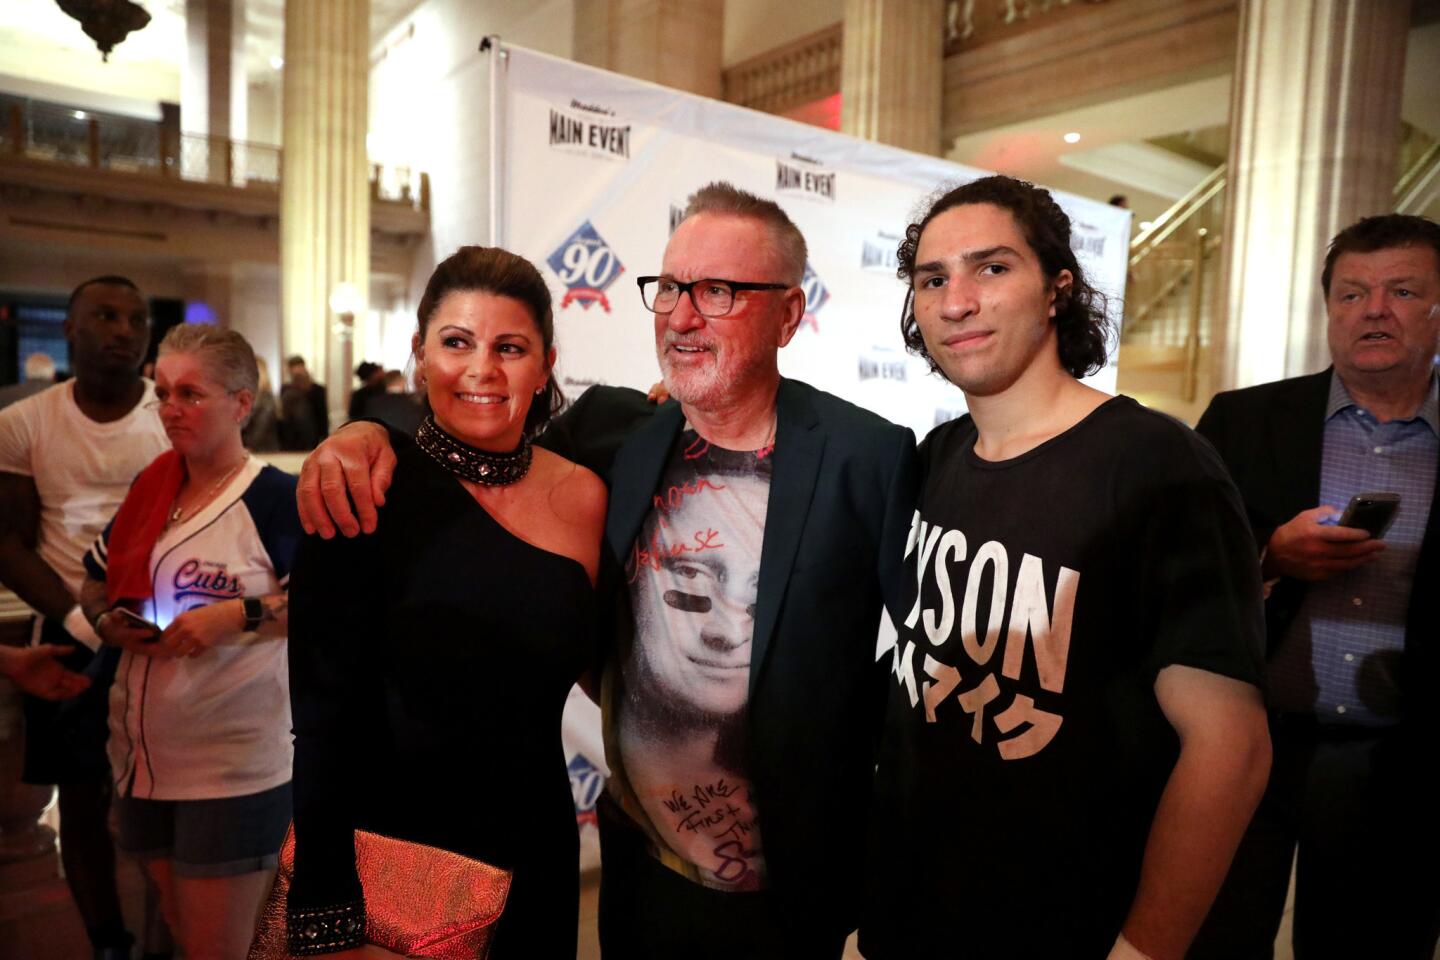 Cubs manager Joe Maddon and his wife, Jaye, pose with boxer Nico Walsh, the grandson of Muhammad Ali, during Maddon's annual charity boxing event called Respect 90 Main Event at the Wintrust Building in downtown Chicago on Friday, May 25, 2018.